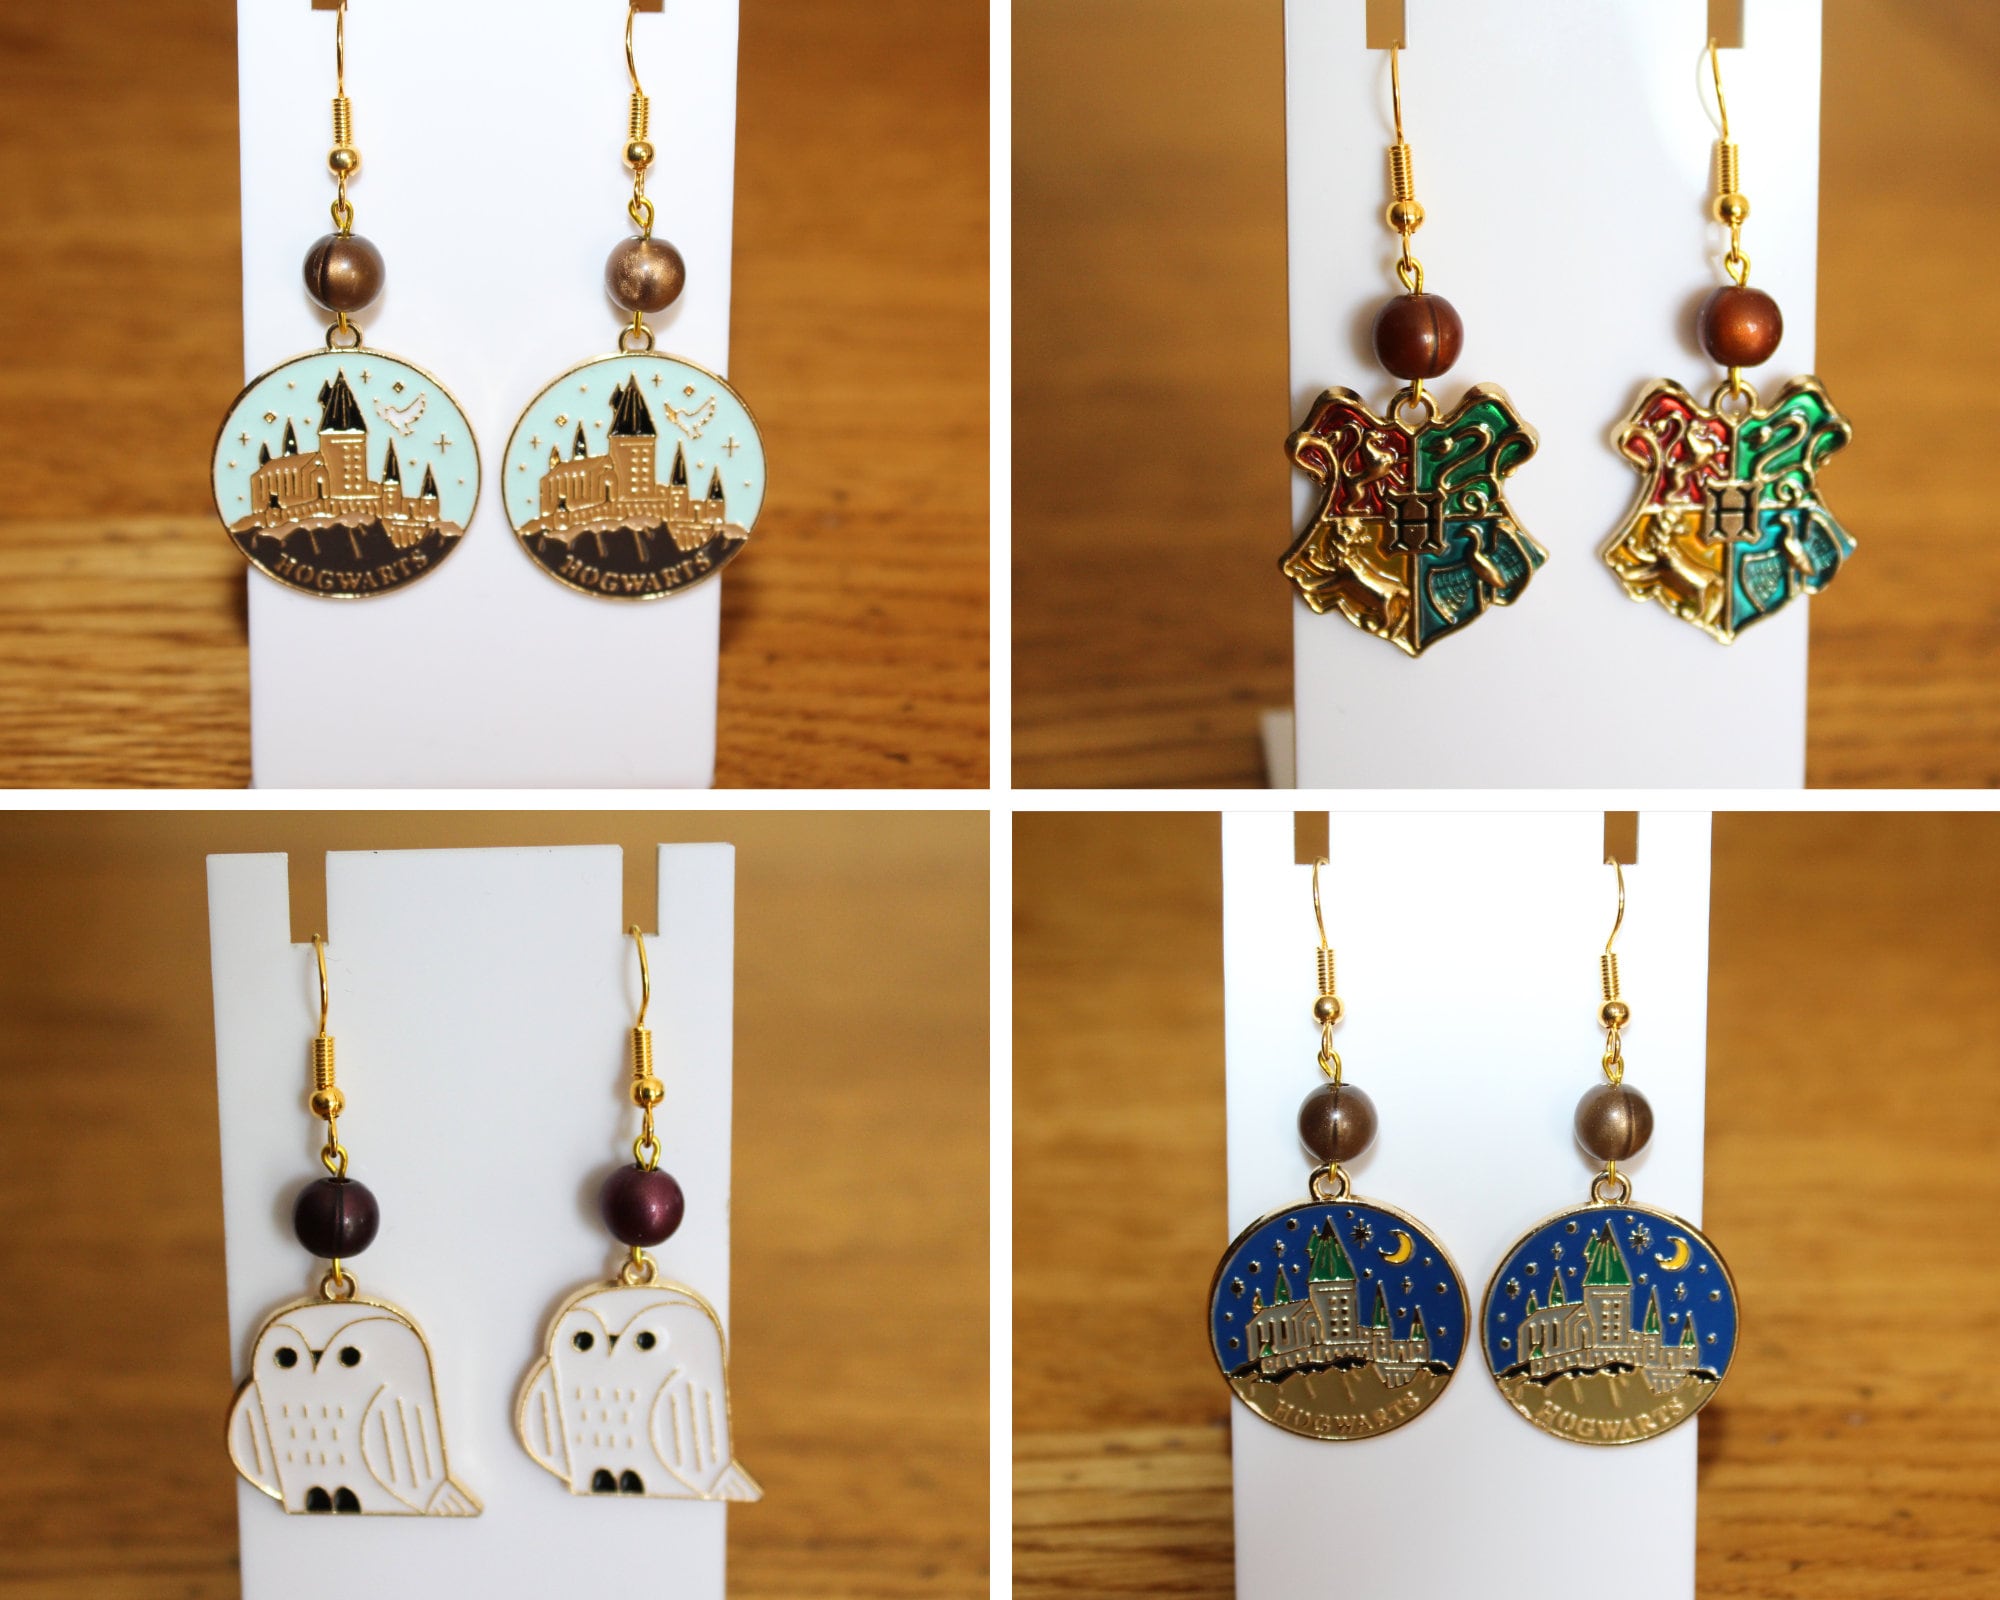 I thought I'd share these chicken earrings I made, heavily inspired by  Story of Seasons! My Etsy is BrokenNailCreations : r/storyofseasons